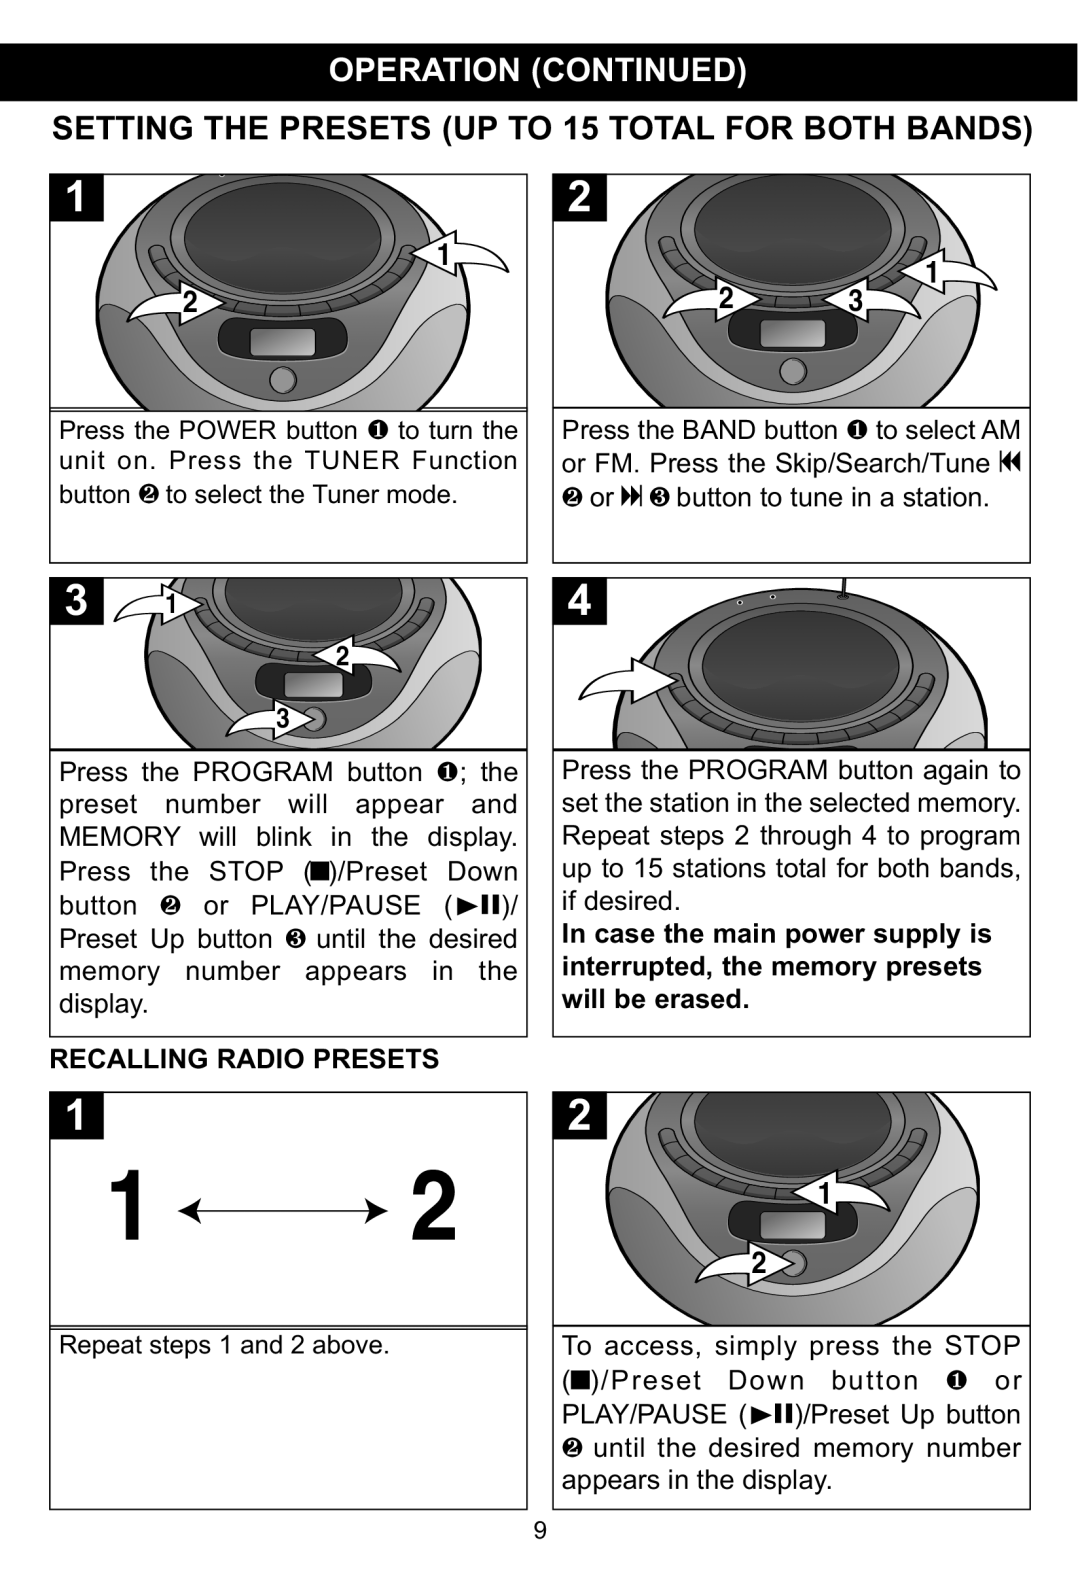 Memorex MP3848 manual Operation Continued, SETTING THE PRESETS UP TO 15 TOTAL FOR BOTH BANDS, Recalling Radio Presets 